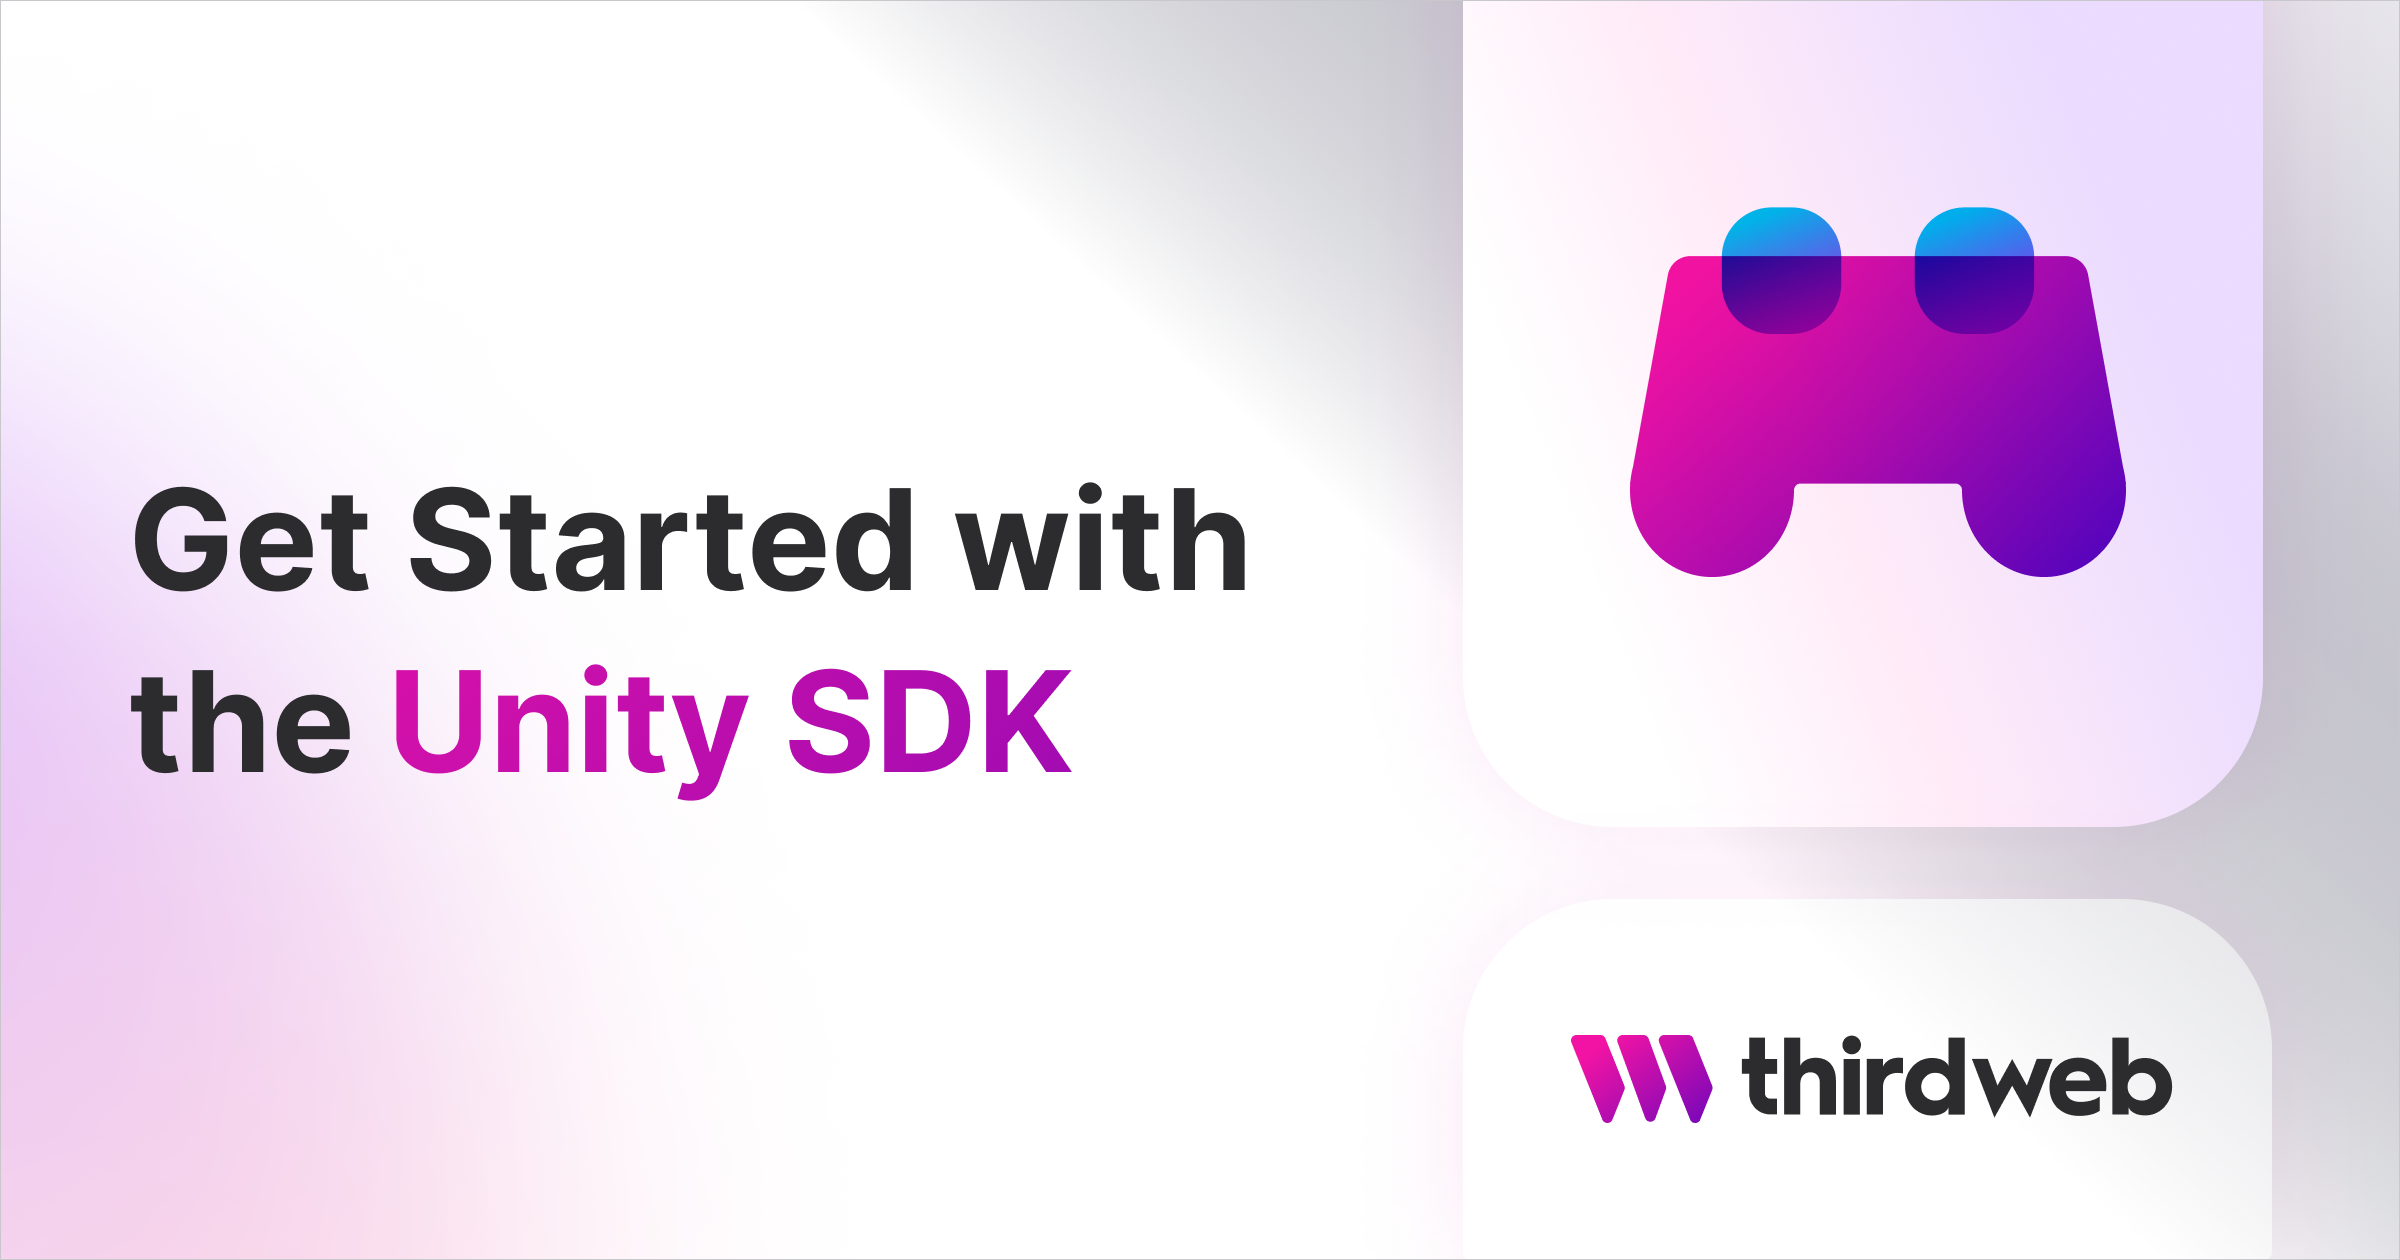 Get Started with the Unity SDK